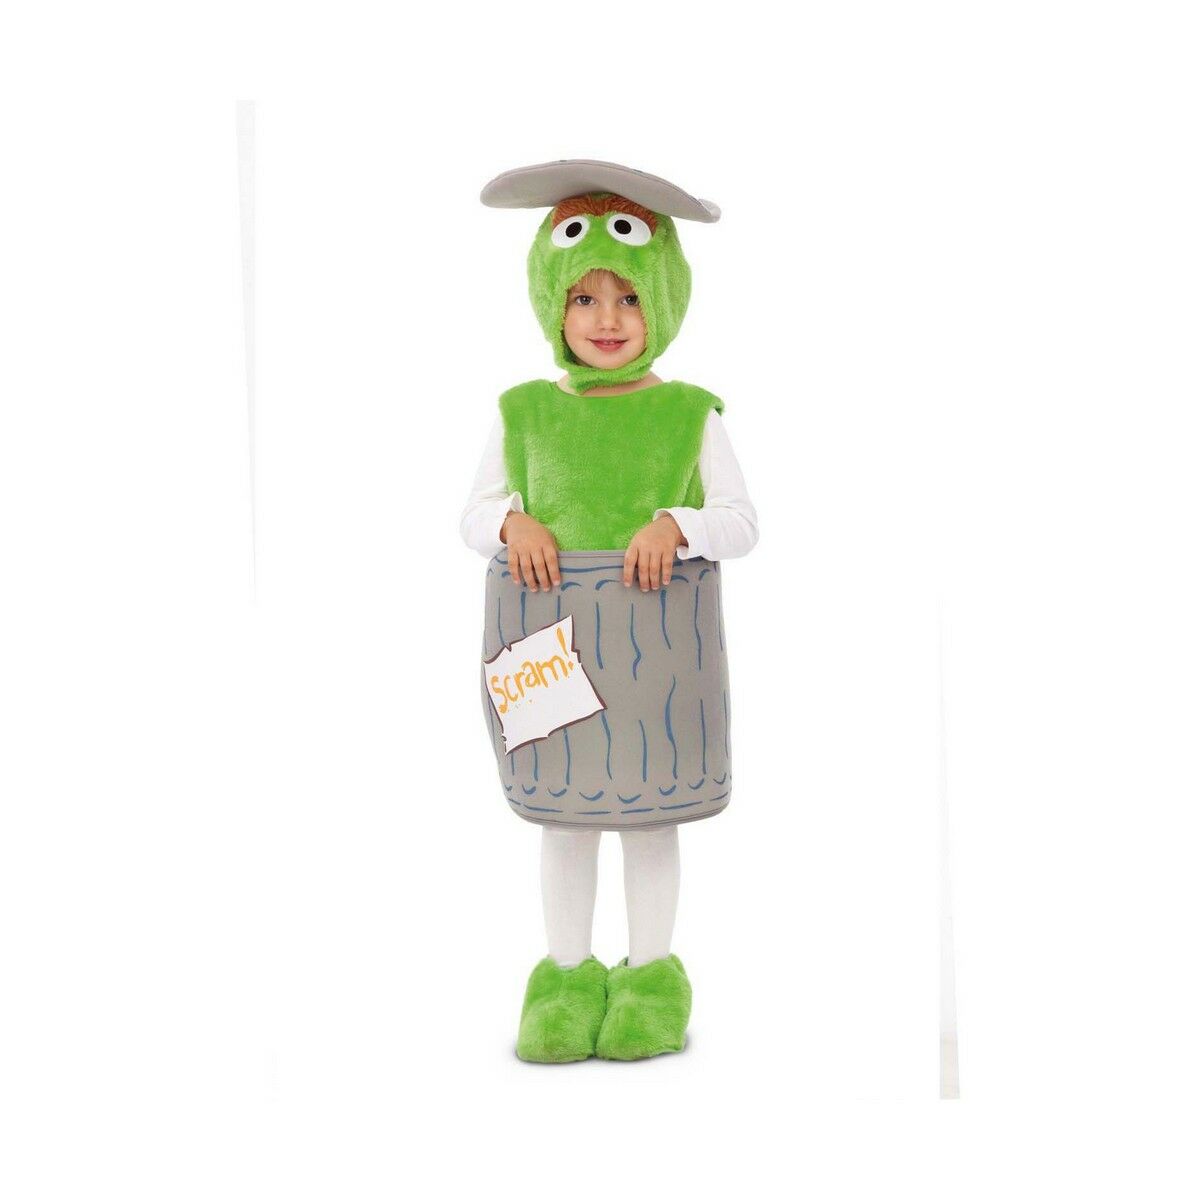 Costume for Babies My Other Me Oscar the Grouch Sesame Street Green (4 Pieces)